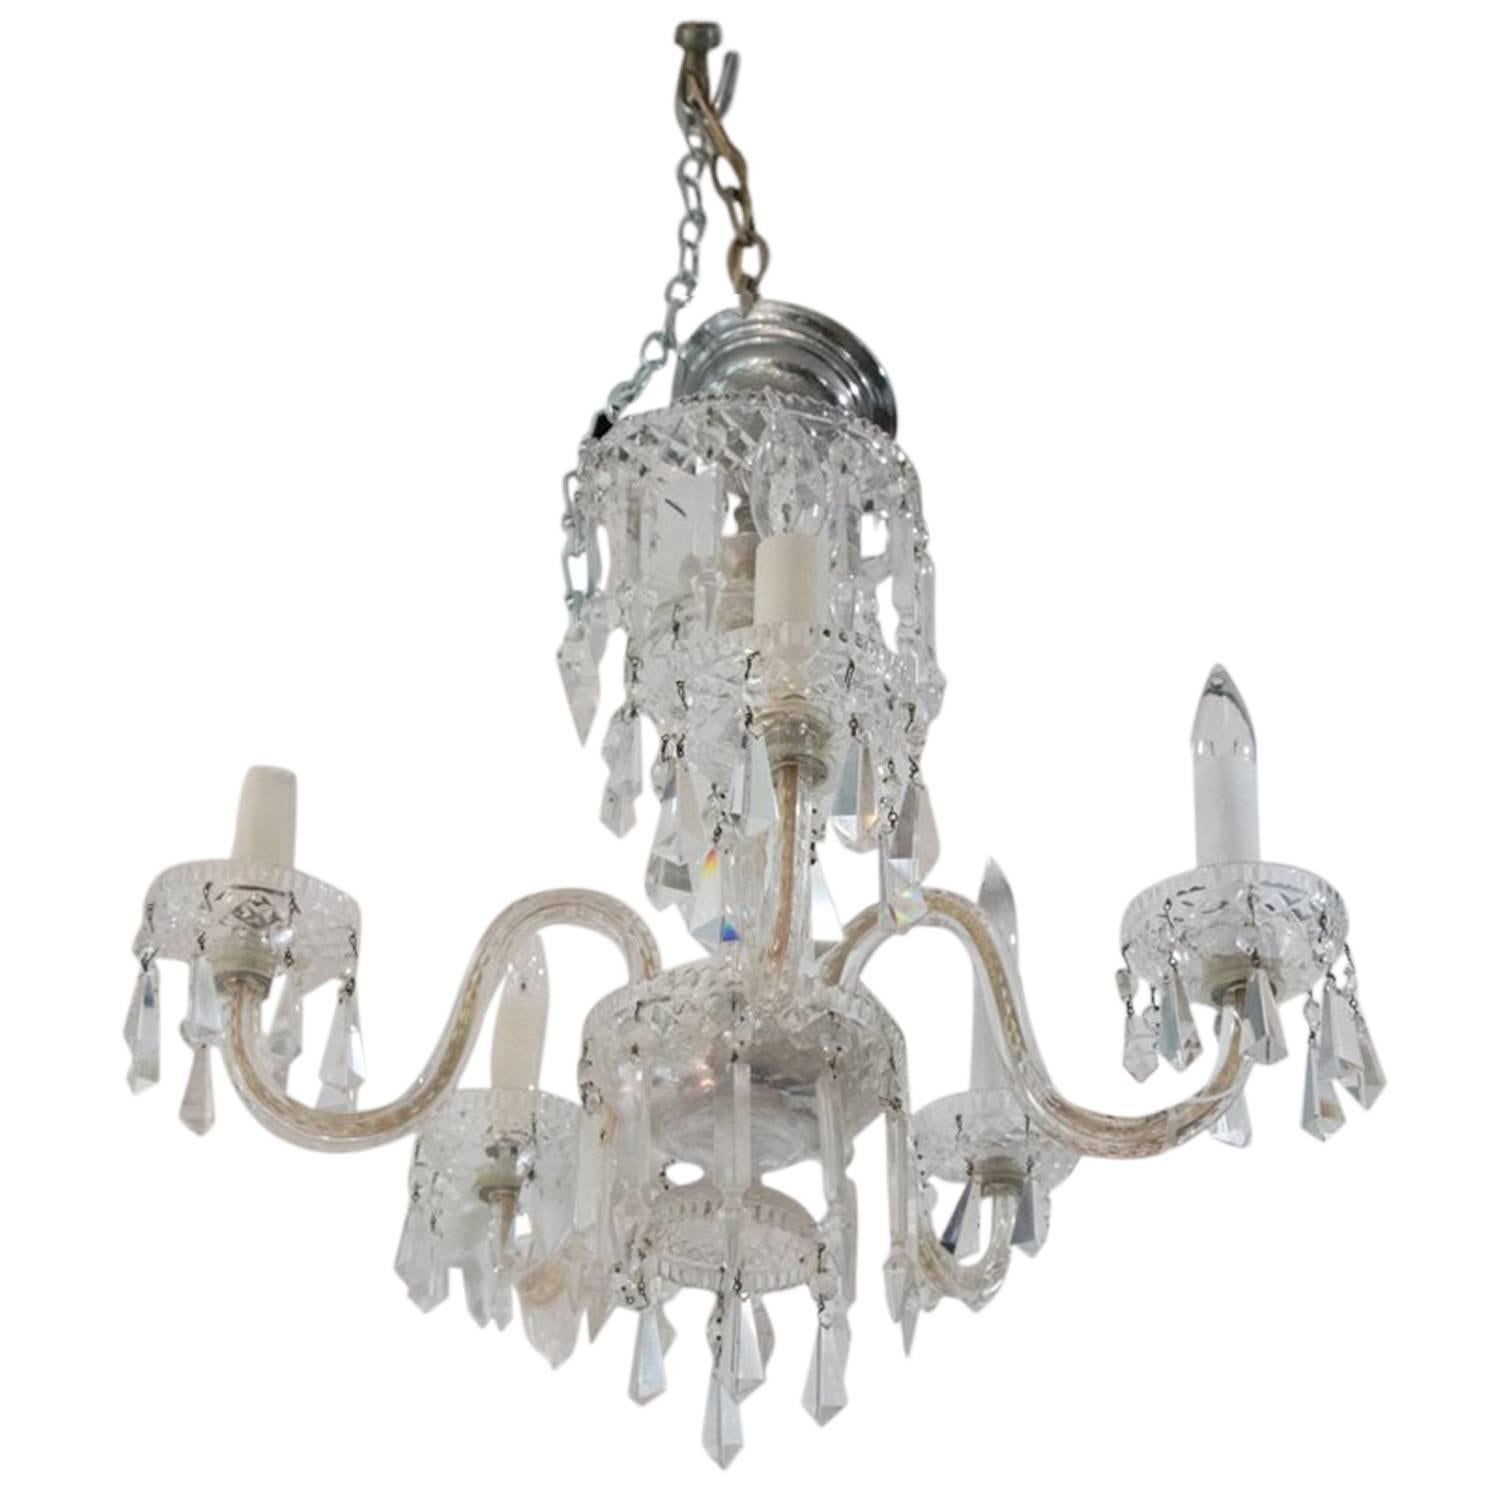 ON SALE NOW!! 1920s Waterford Style Fantastic! Cut Crystal Five-Arm Chandelier For Sale